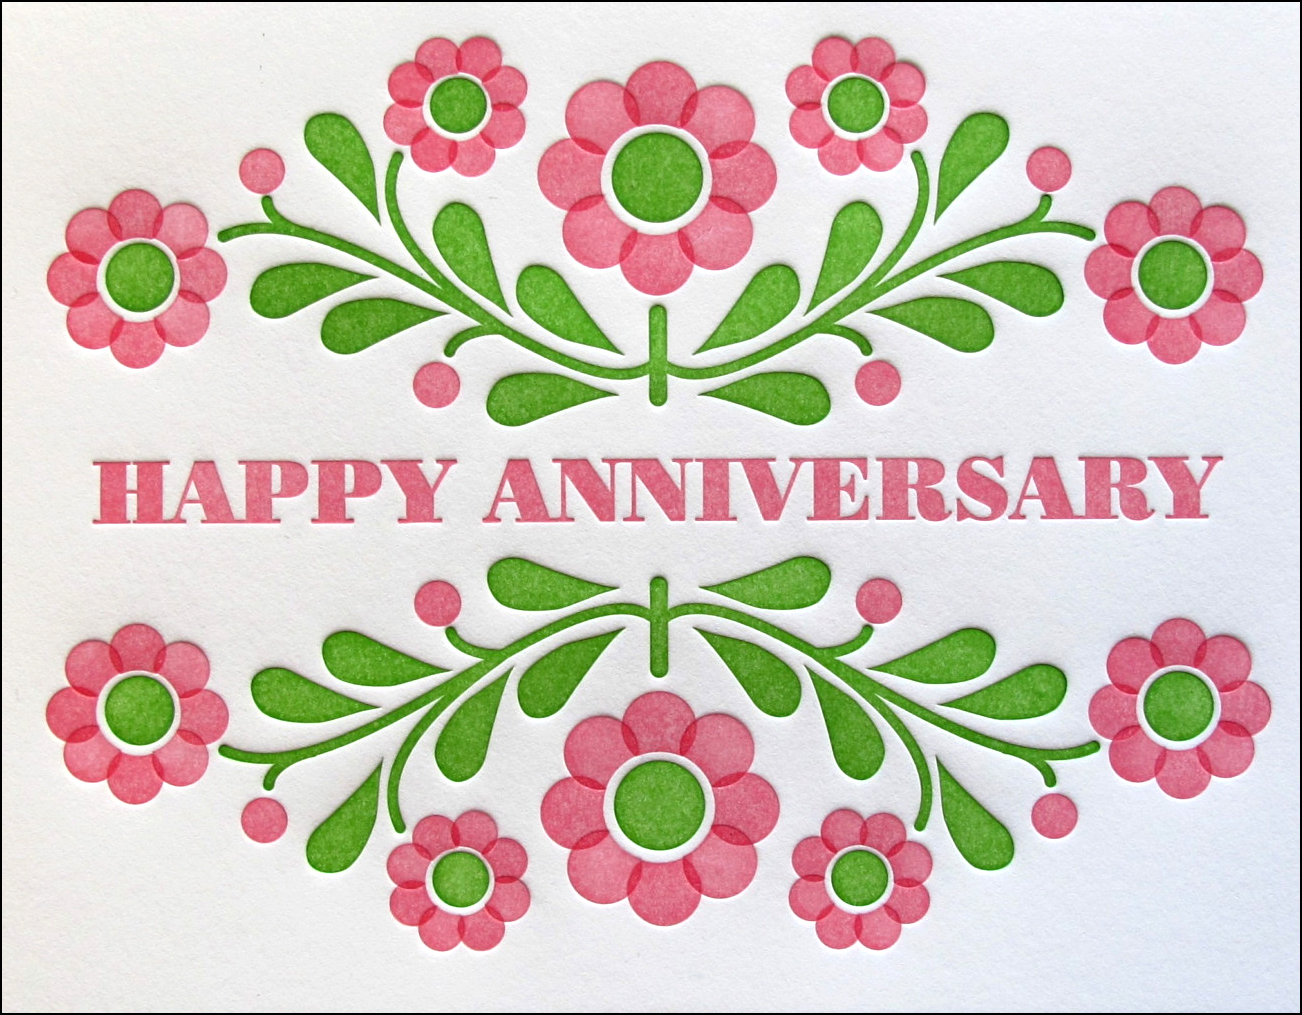 Happy Marriage Anniversary Greeting Cards HD Wallpaper